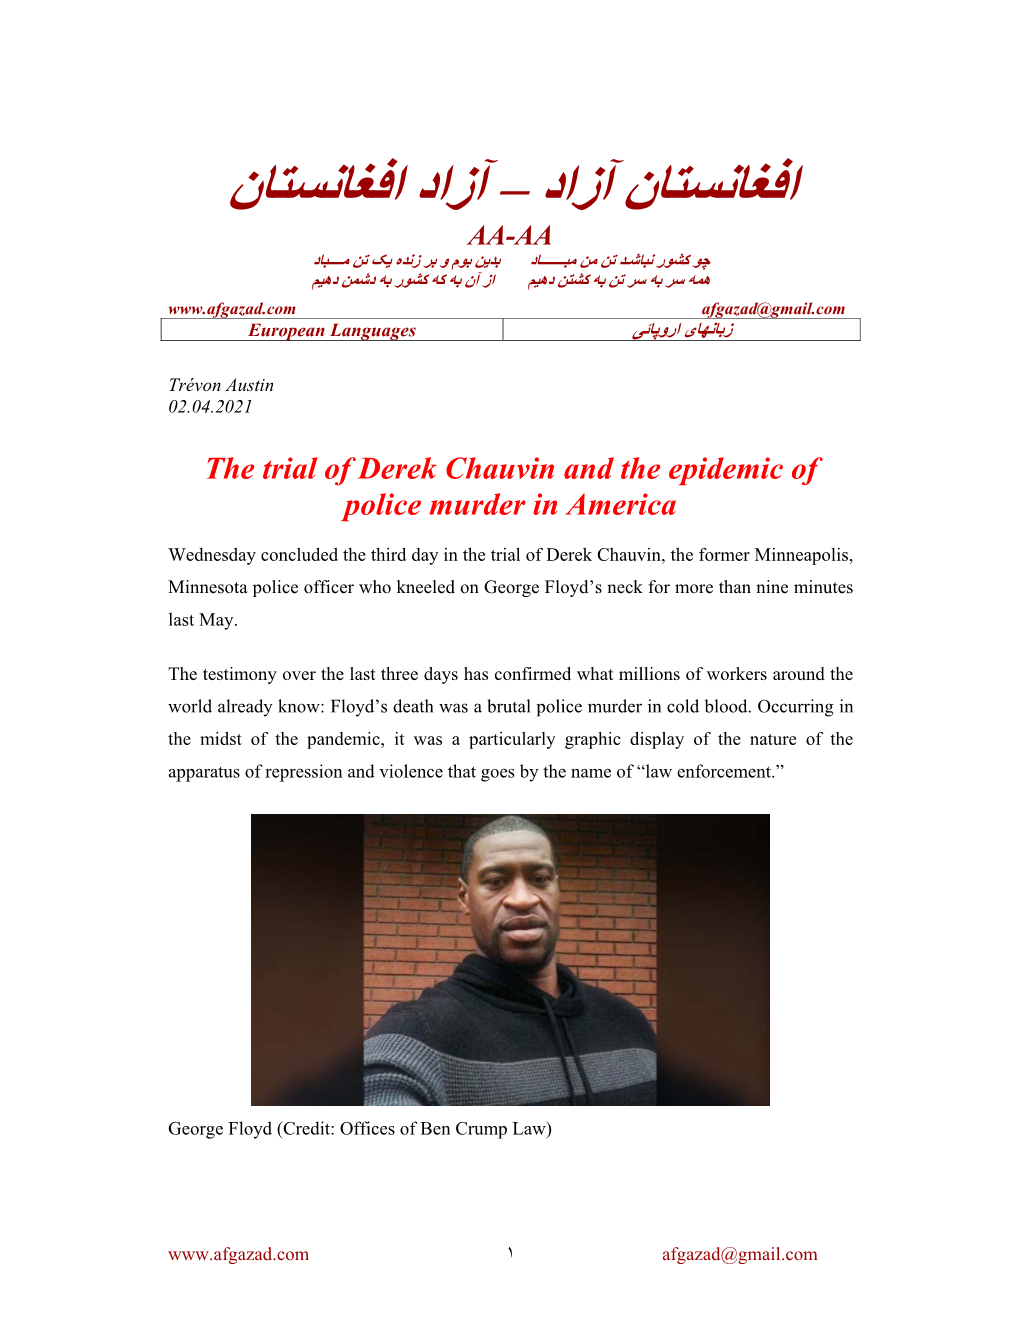 The Trial of Derek Chauvin and the Epidemic of Police Murder in America